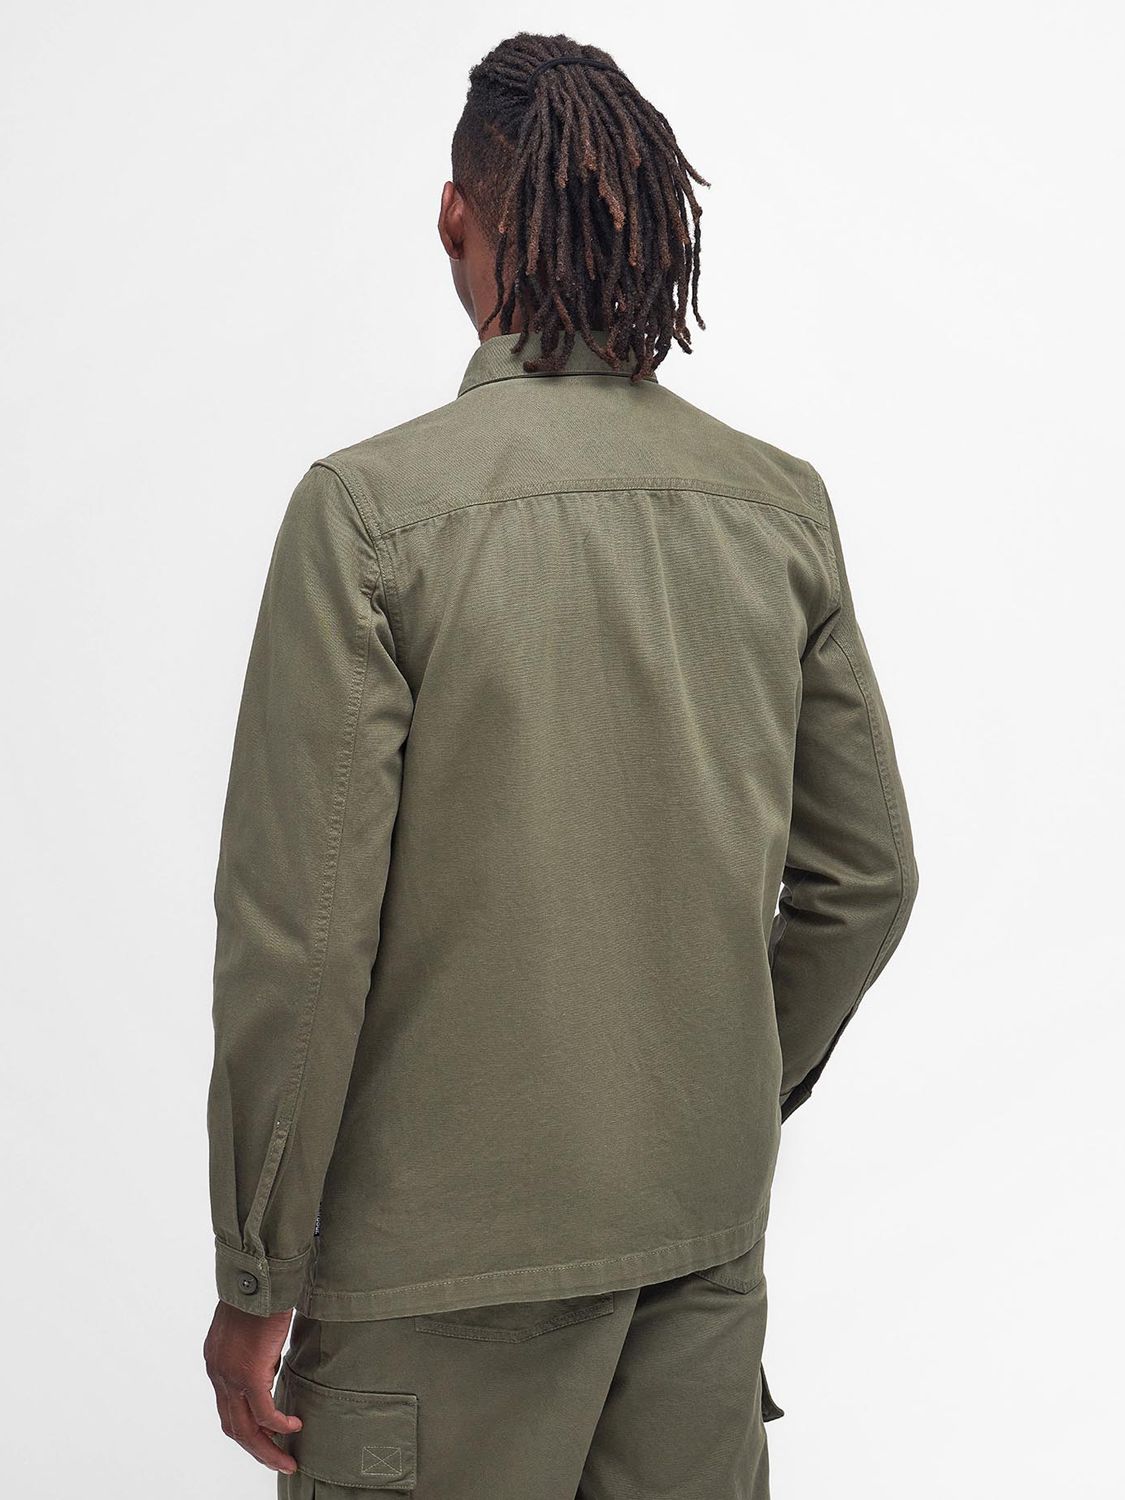 Barbour Robhill Cotton Overshirt, Dusty Olive at John Lewis & Partners